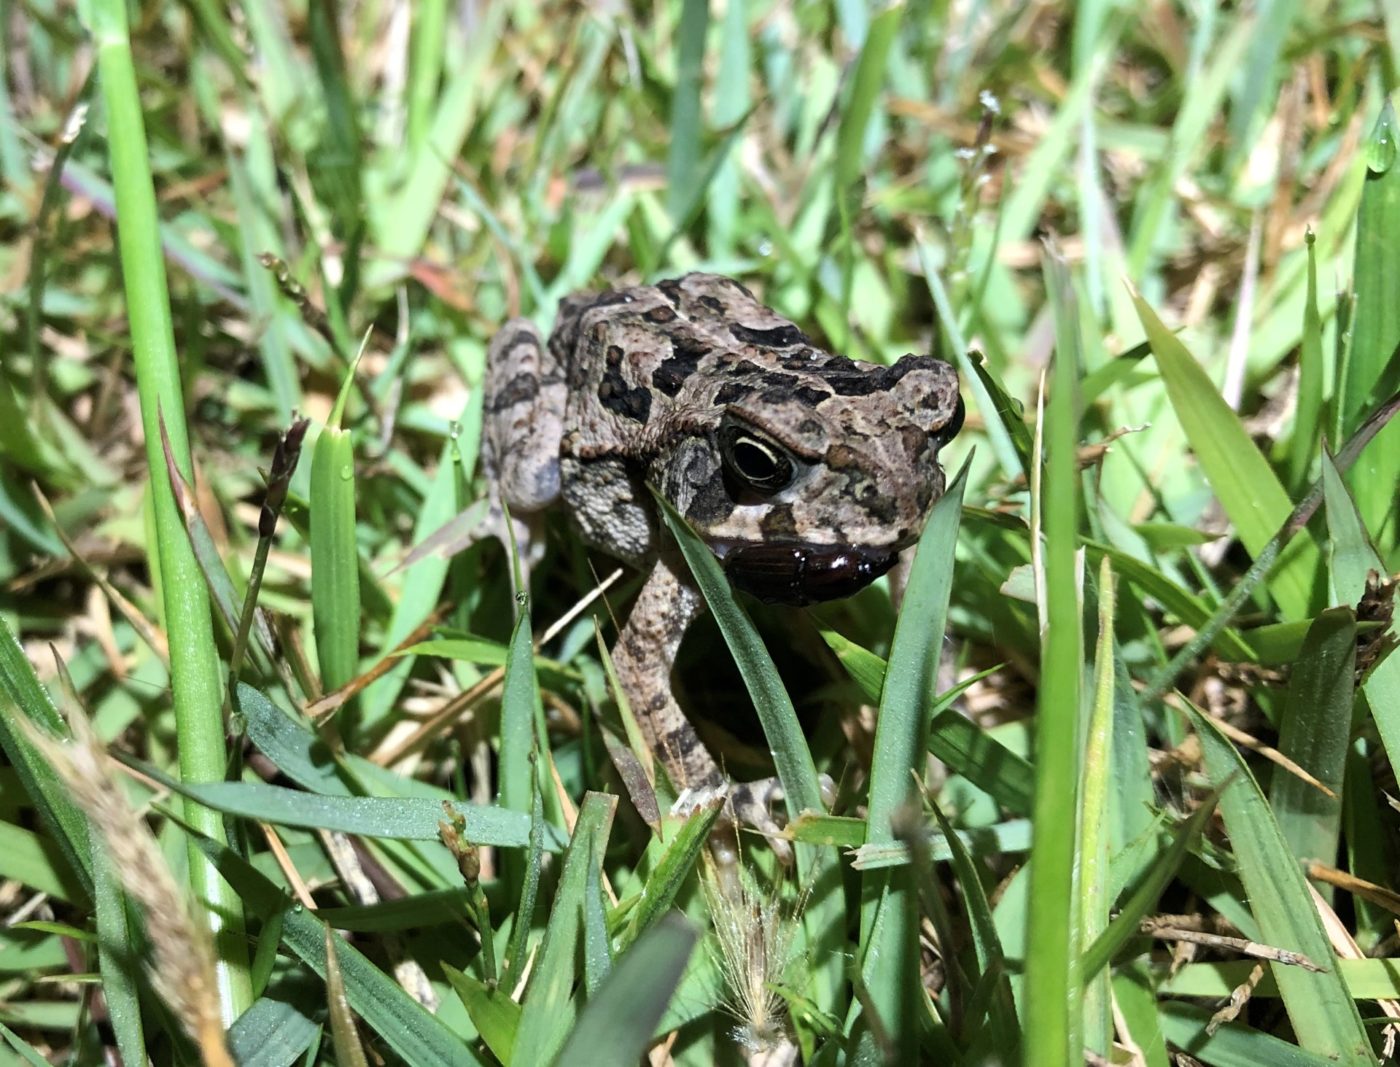 Cane toad in the grass